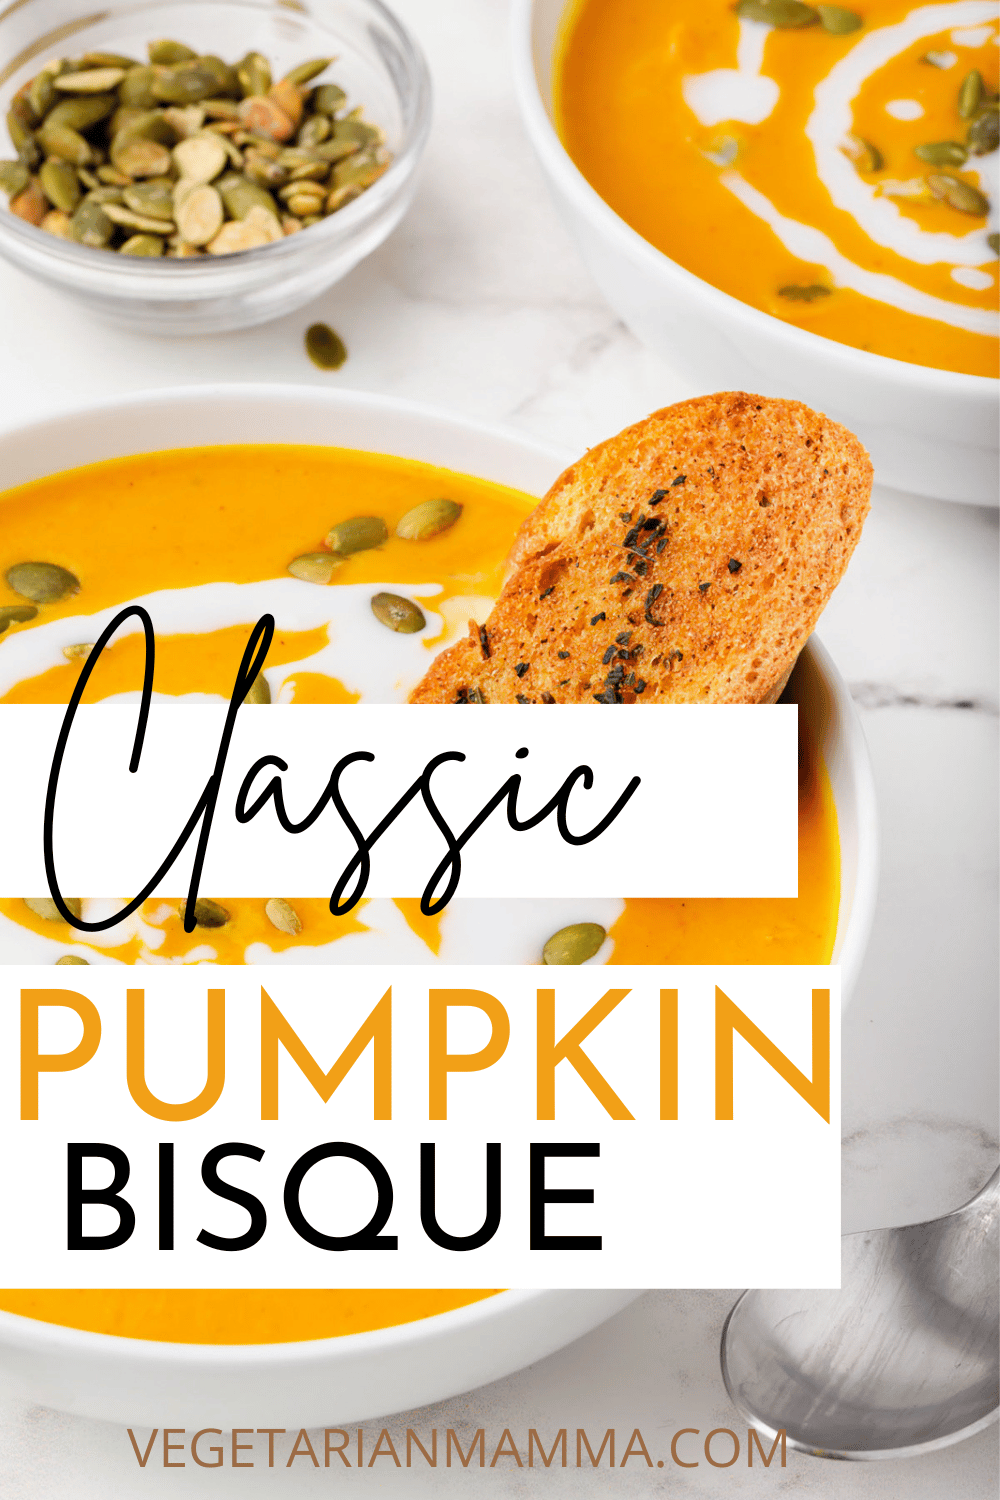 This is an insanely delicious and easy Pumpkin Bisque made with canned pumpkin puree. This pumpkin bisque is family friendly and makes great leftovers. 